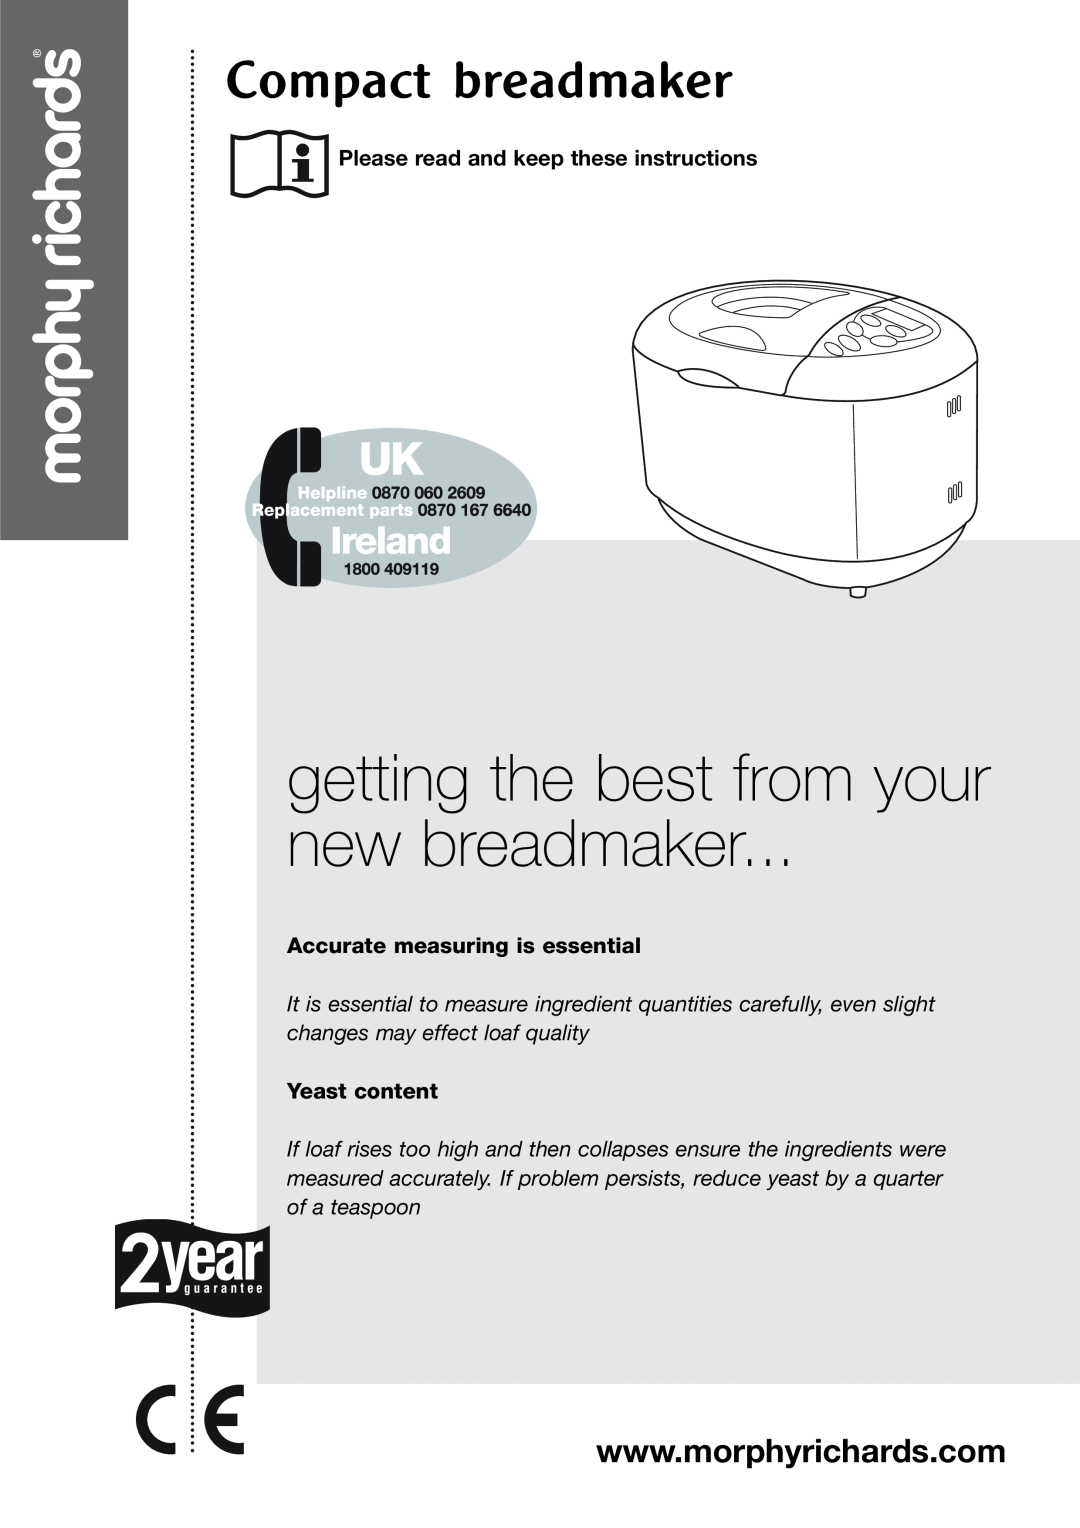 Morphy Richards Compact breadmaker manual Please read and keep these instructions, Accurate measuring is essential 